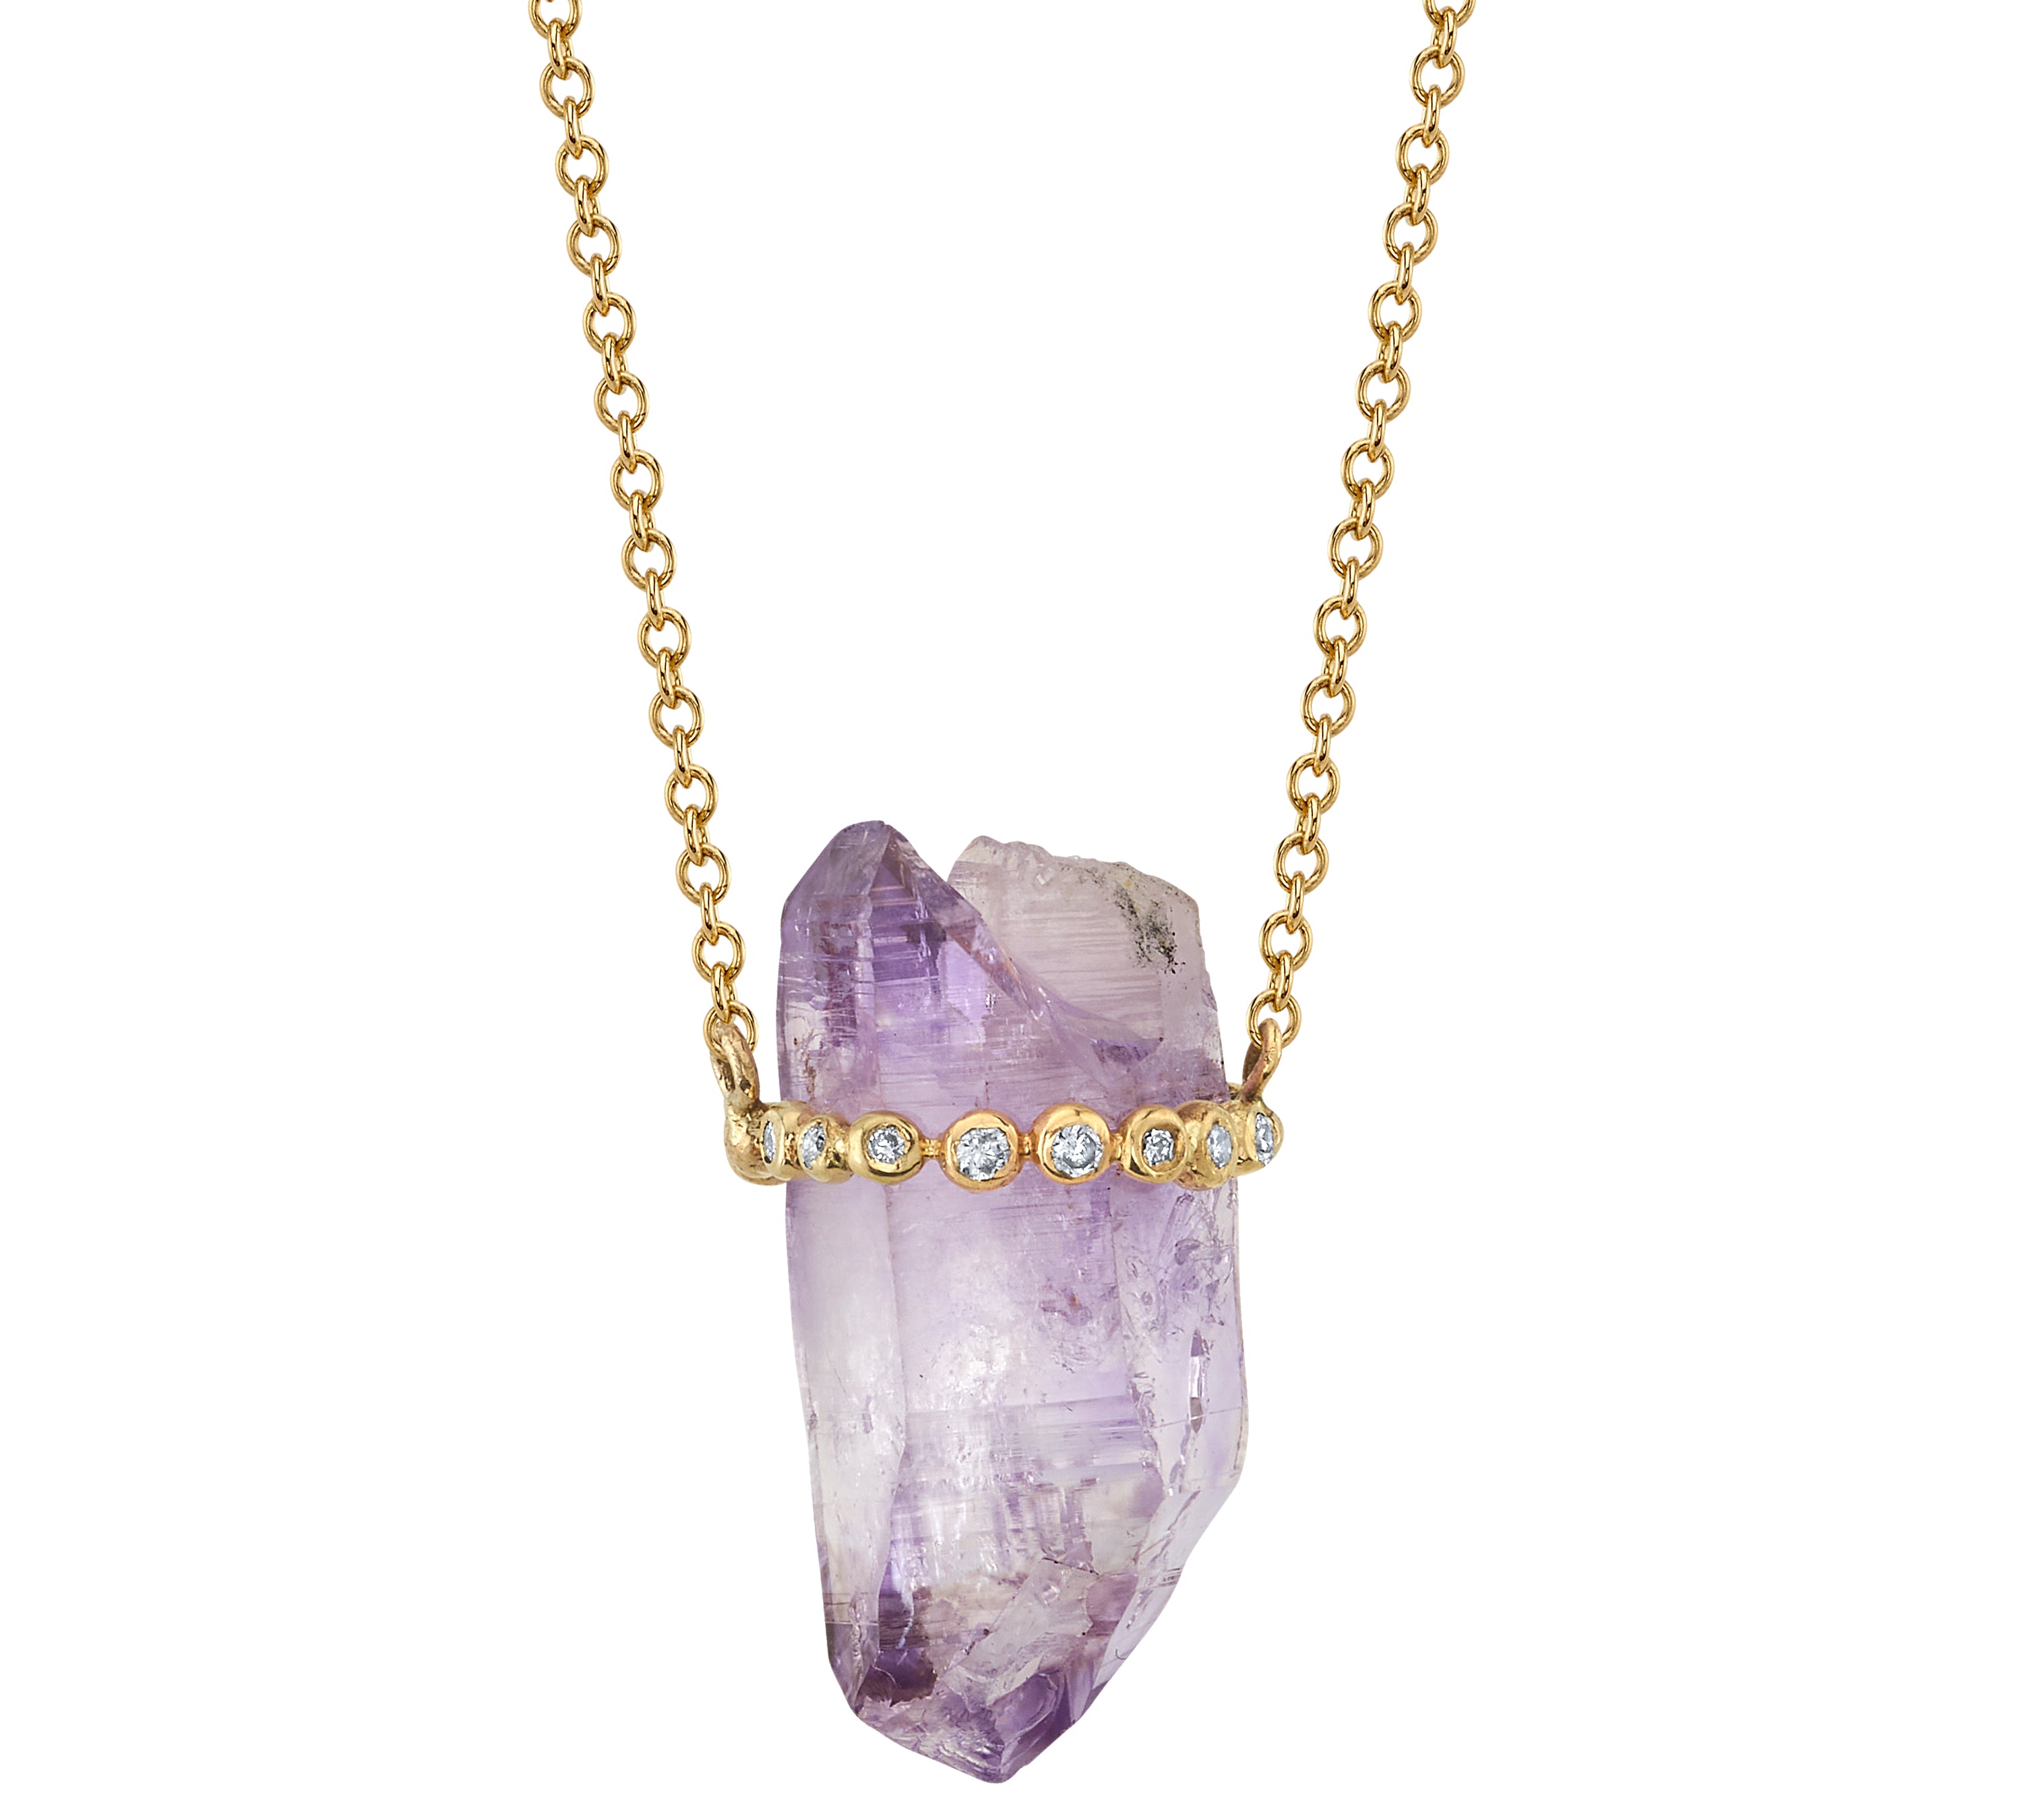 Medium Amethyst Crystal Necklace with Diamonds Necklace Jill Hoffmeister   